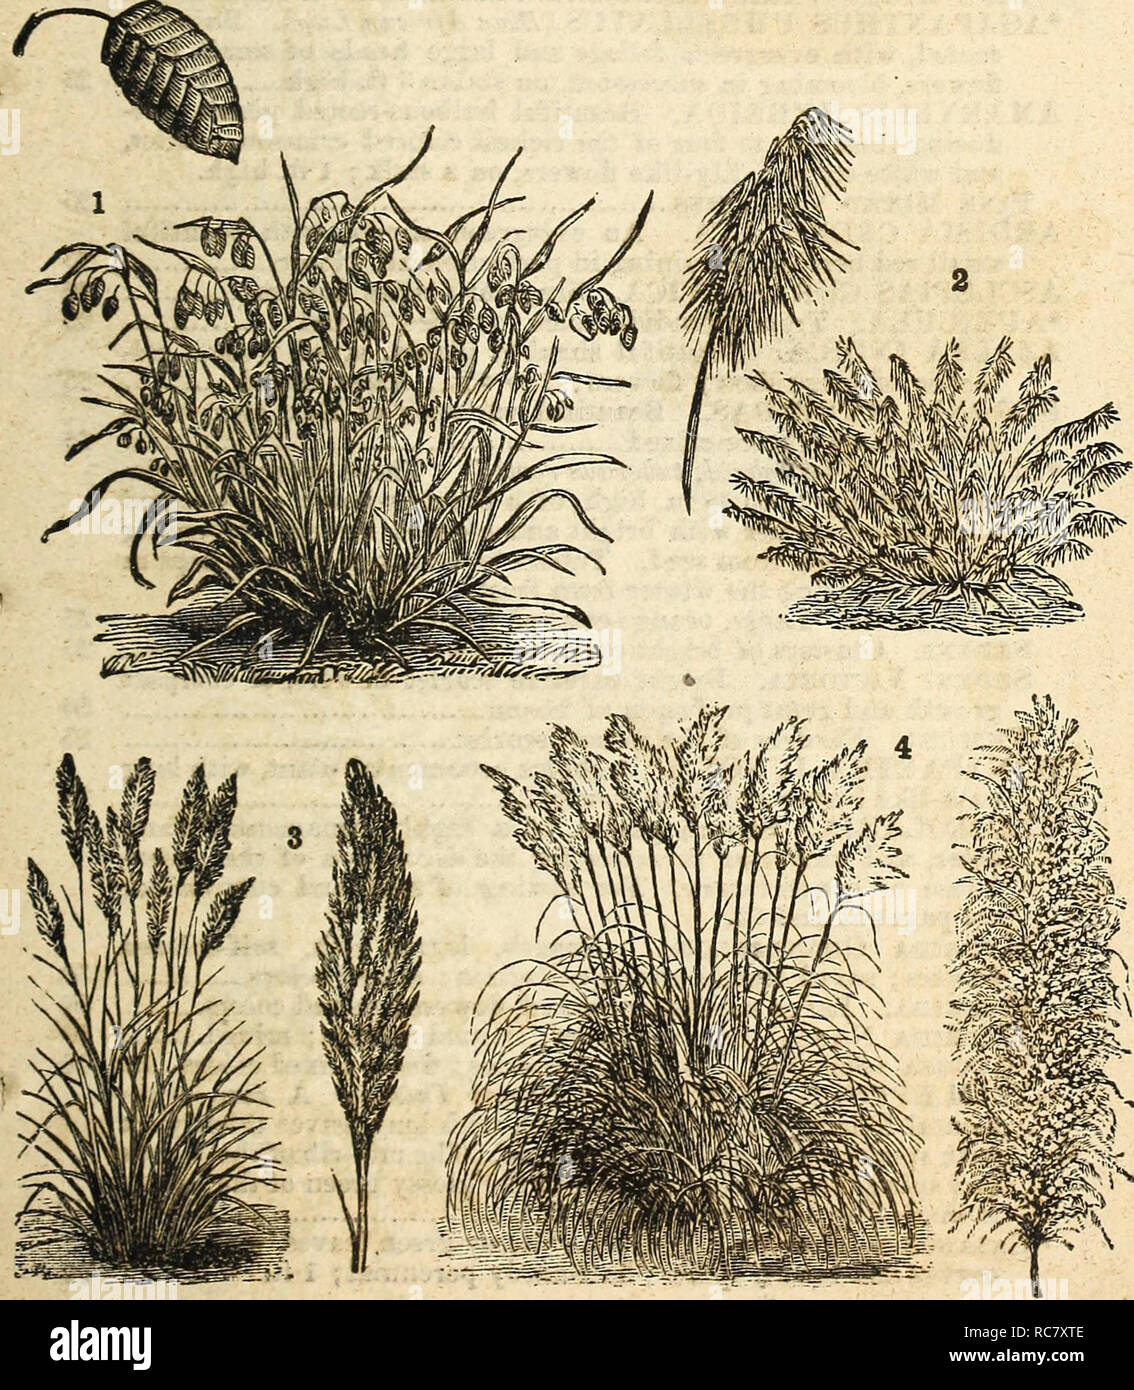 . Dreer's garden calendar : 1877. Seeds Catalogs; Nursery stock Catalogs; Gardening Catalogs; Flowers Seeds Catalogs. Dreer's Garden Calendar. 85 LASIAGROSTIS ARGENTEA. A beautiful silver-white grass, fine tor bouquets; hardy perennial 5 MILIUM EFT IJ SUM (Pearl Grass). Grows best in shady places; panicles widely diffused, fine for bouquets; hardy perennial 5 PENNISETUM LONGISTILUM. A very graceful plant; 1£ ft... 5 PHALAR1S ARUND1NACEA. A variety of Ribbon Grass; hardy perennial; 3 ft 5 STIPA PENNATA {Feather Grass). Hardy perennial plant with beautiful delicate white feathery grass; flowerin Stock Photo